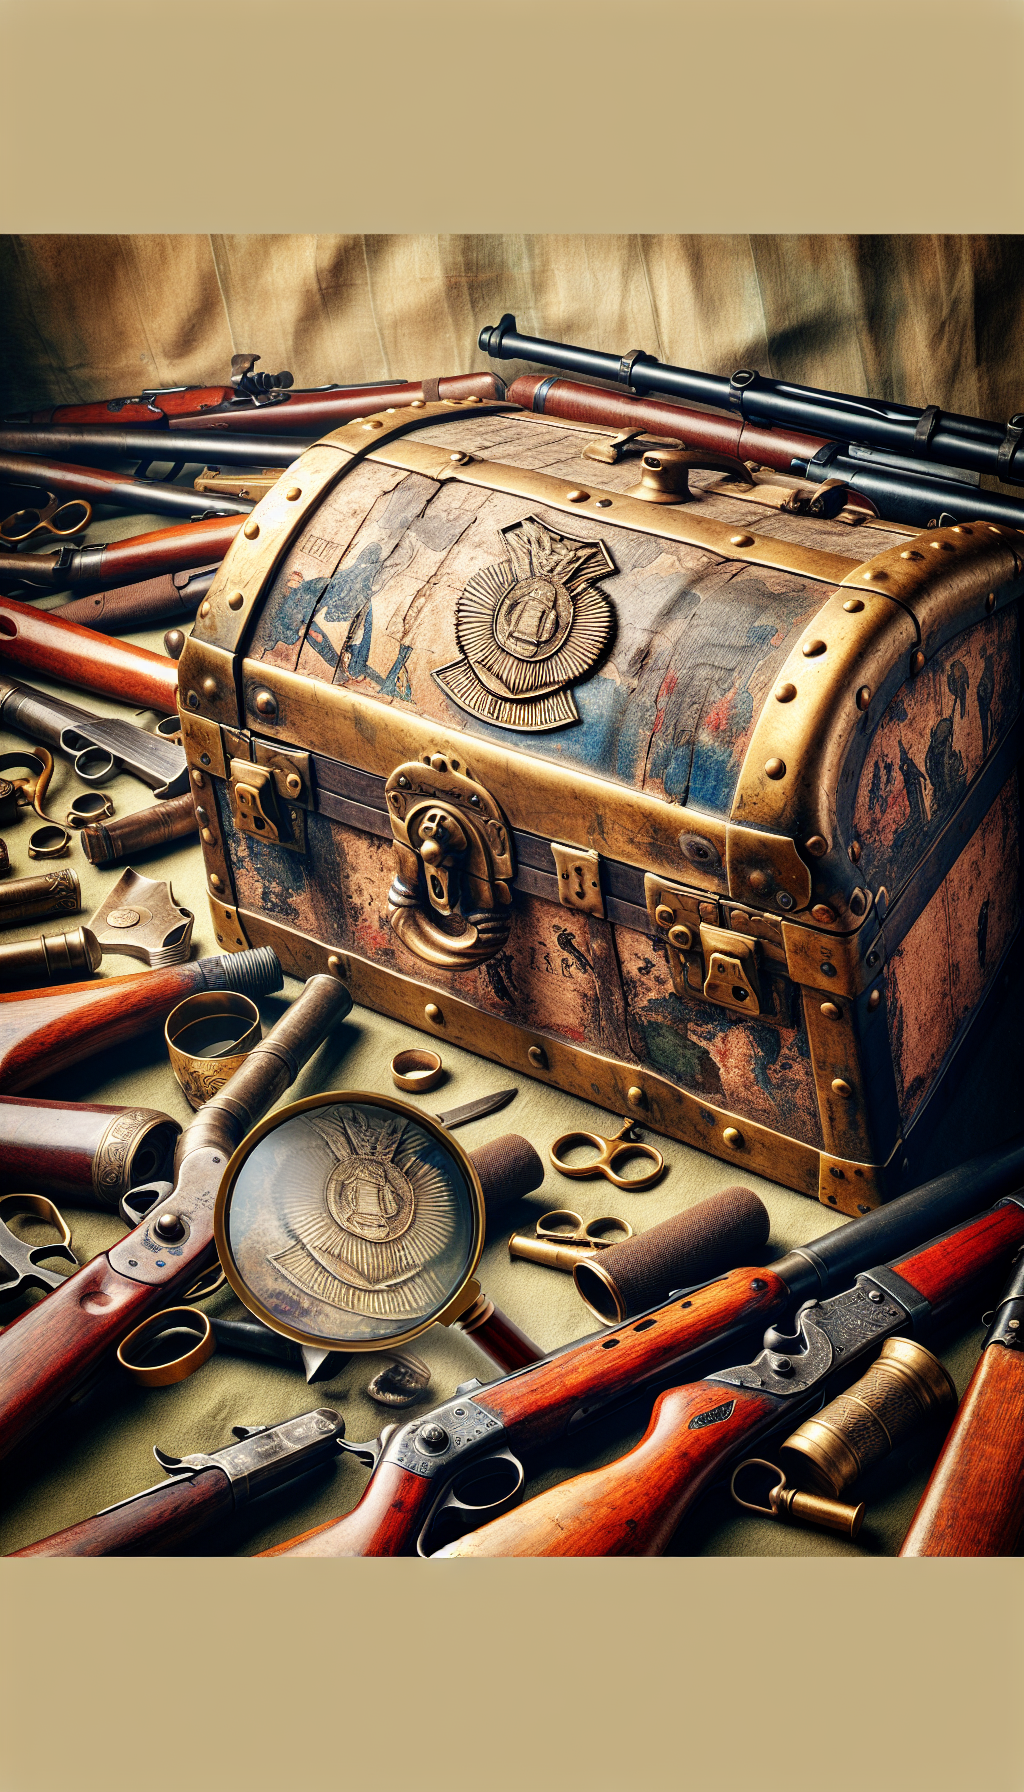 An ancient, brass-trimmed military trunk sits ajar amidst a collection of period-authentic armaments. Its weathered surface bears the scars of countless battles, while a magnifying glass hovers above, inspecting its unique patina and etched battalion insignia. The contrasting backdrop oscillates between delicate watercolor tones and sharp, penciled sketches, symbolizing the interplay of historical authenticity and the passage of time.